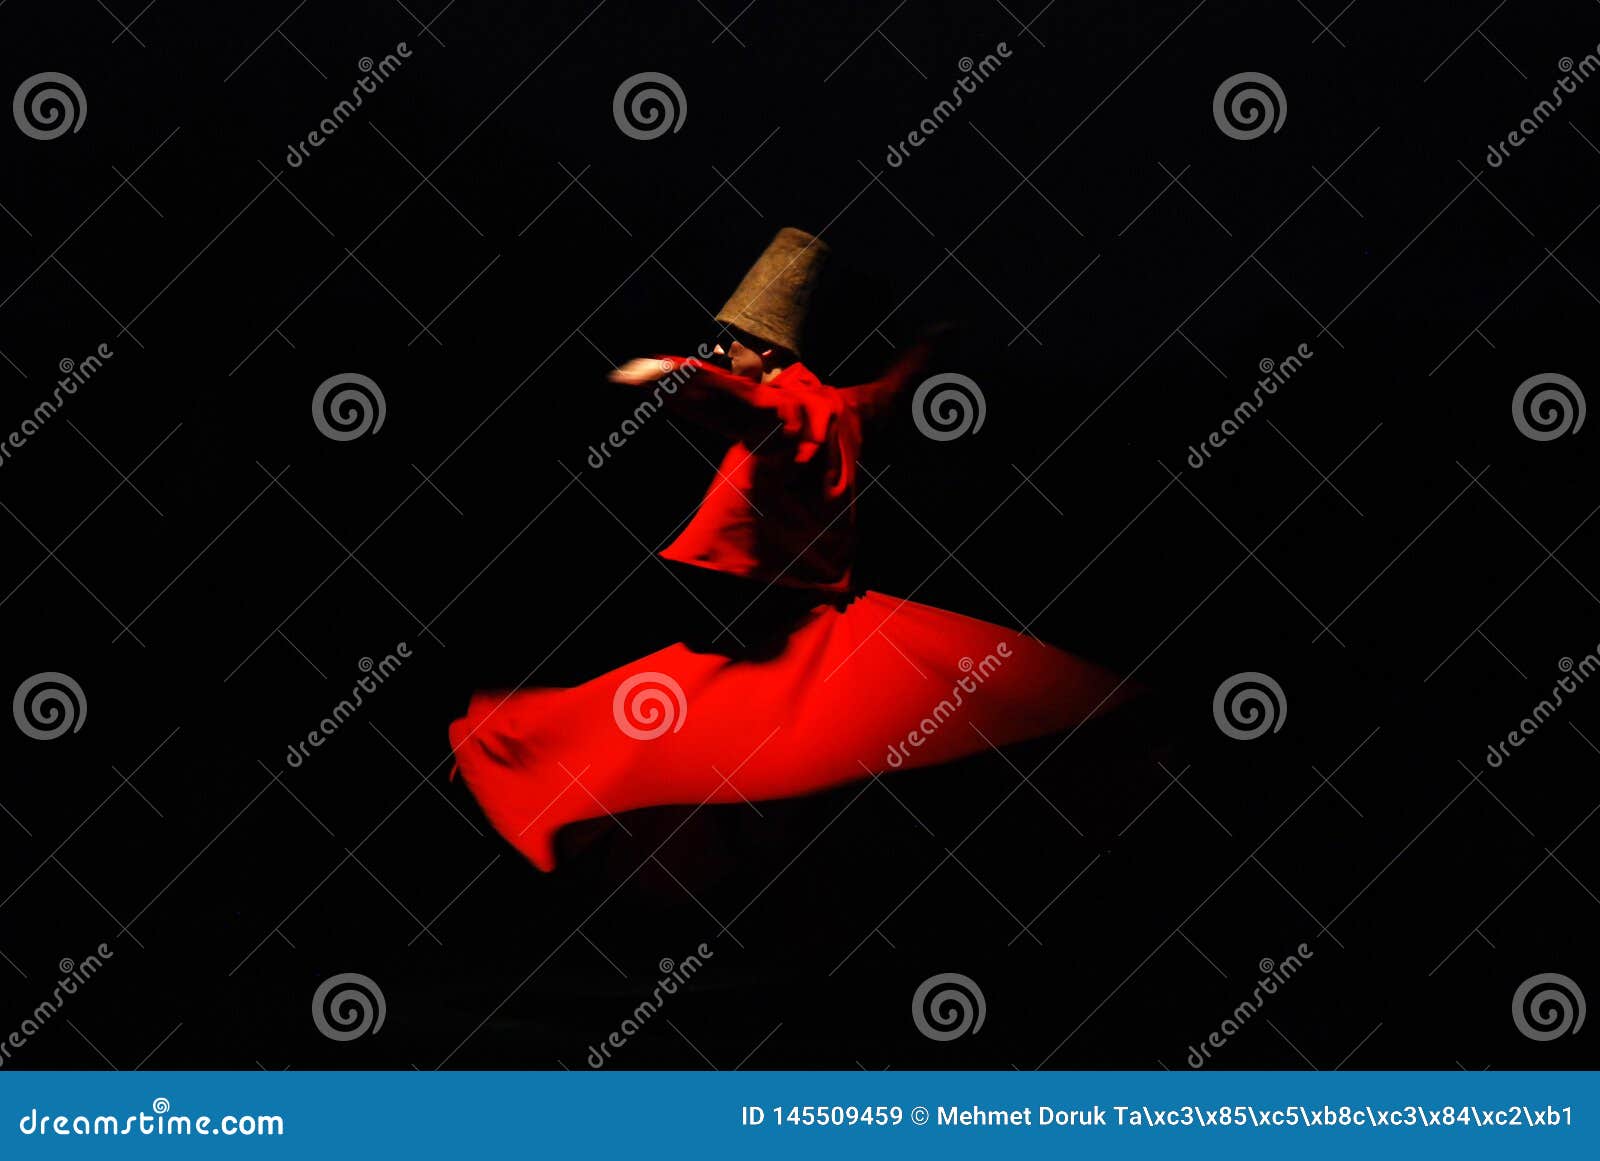 whirling dervish on black background in red costume